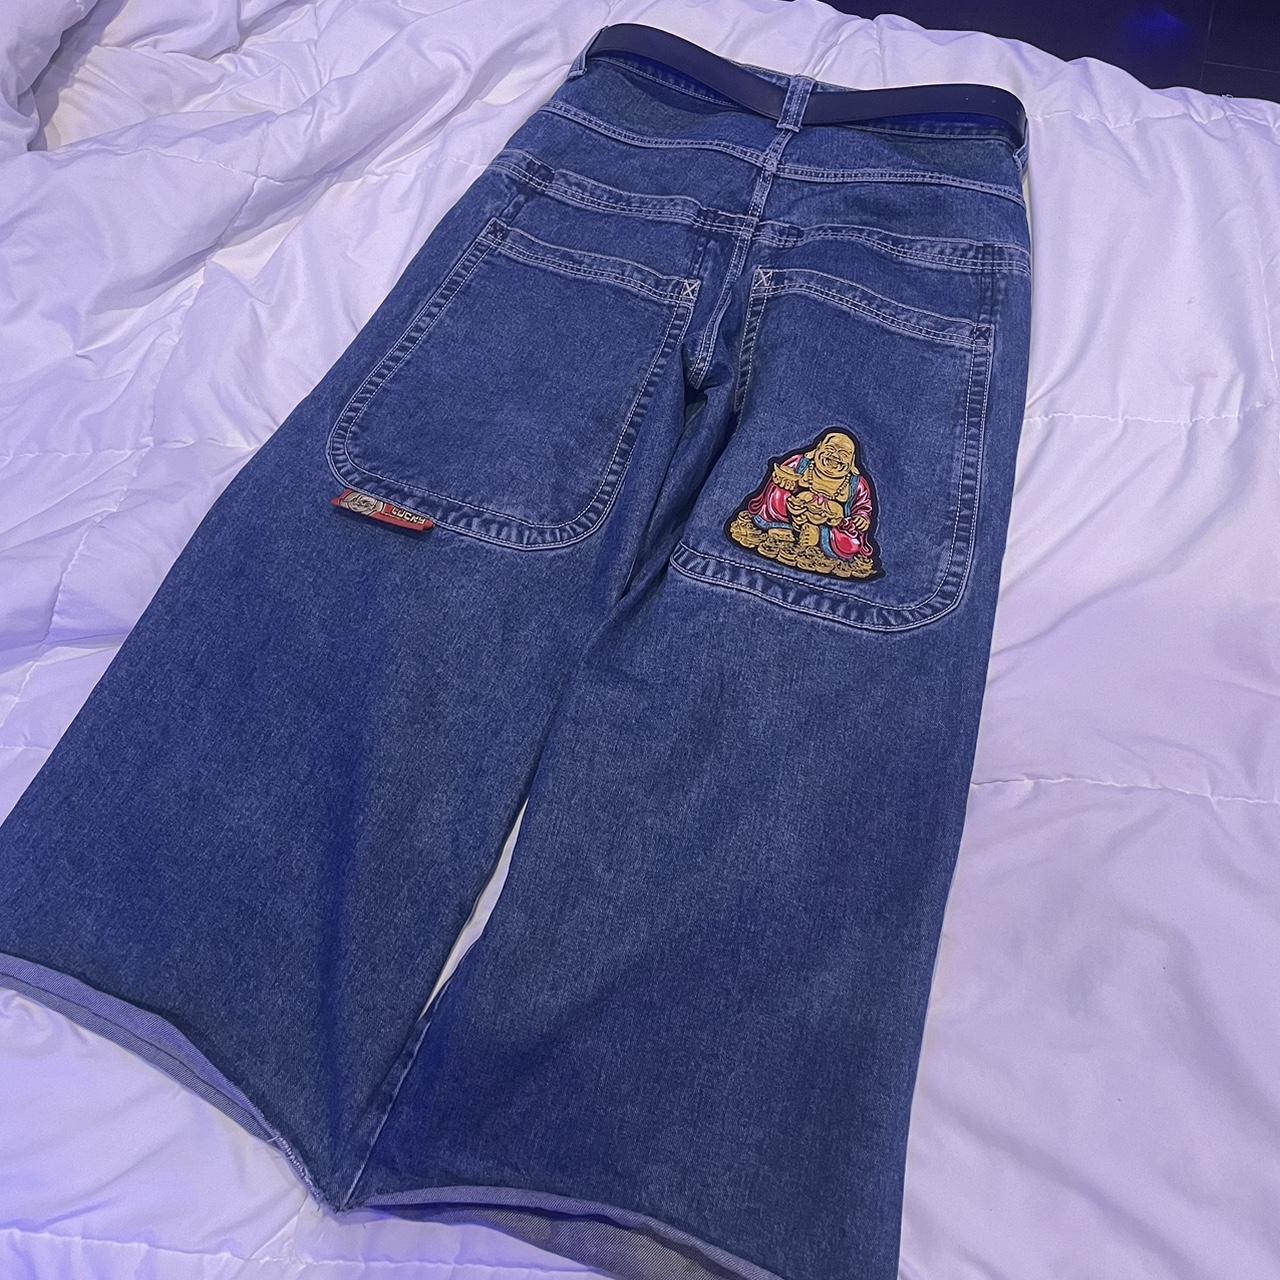 SICK JNCO BUDDHAS! they are in really good condition... - Depop